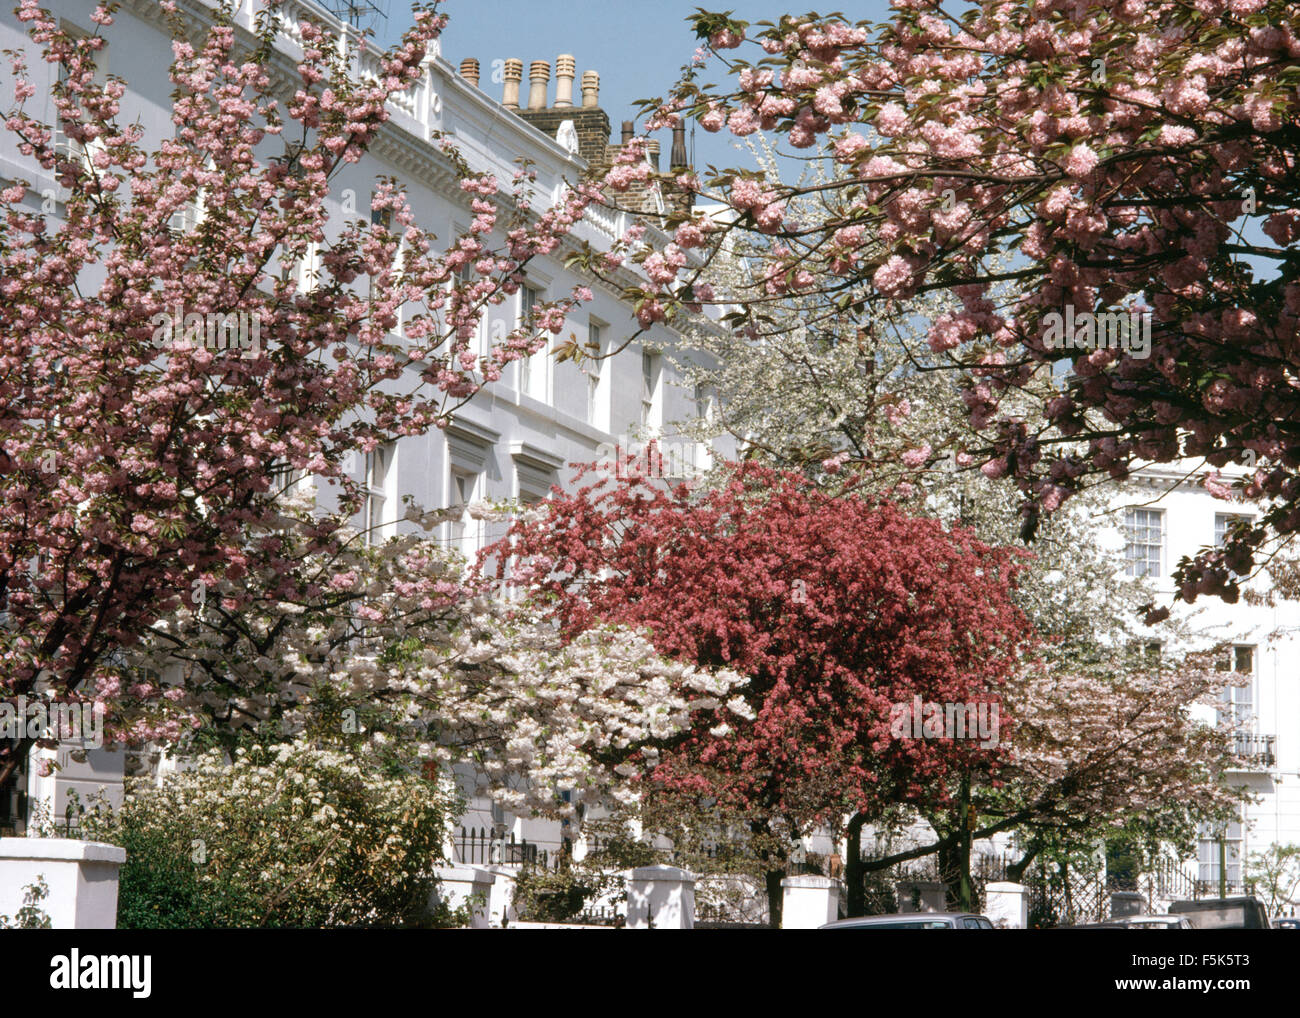 Victorian terraced houses and pink flowering trees Stock Photo